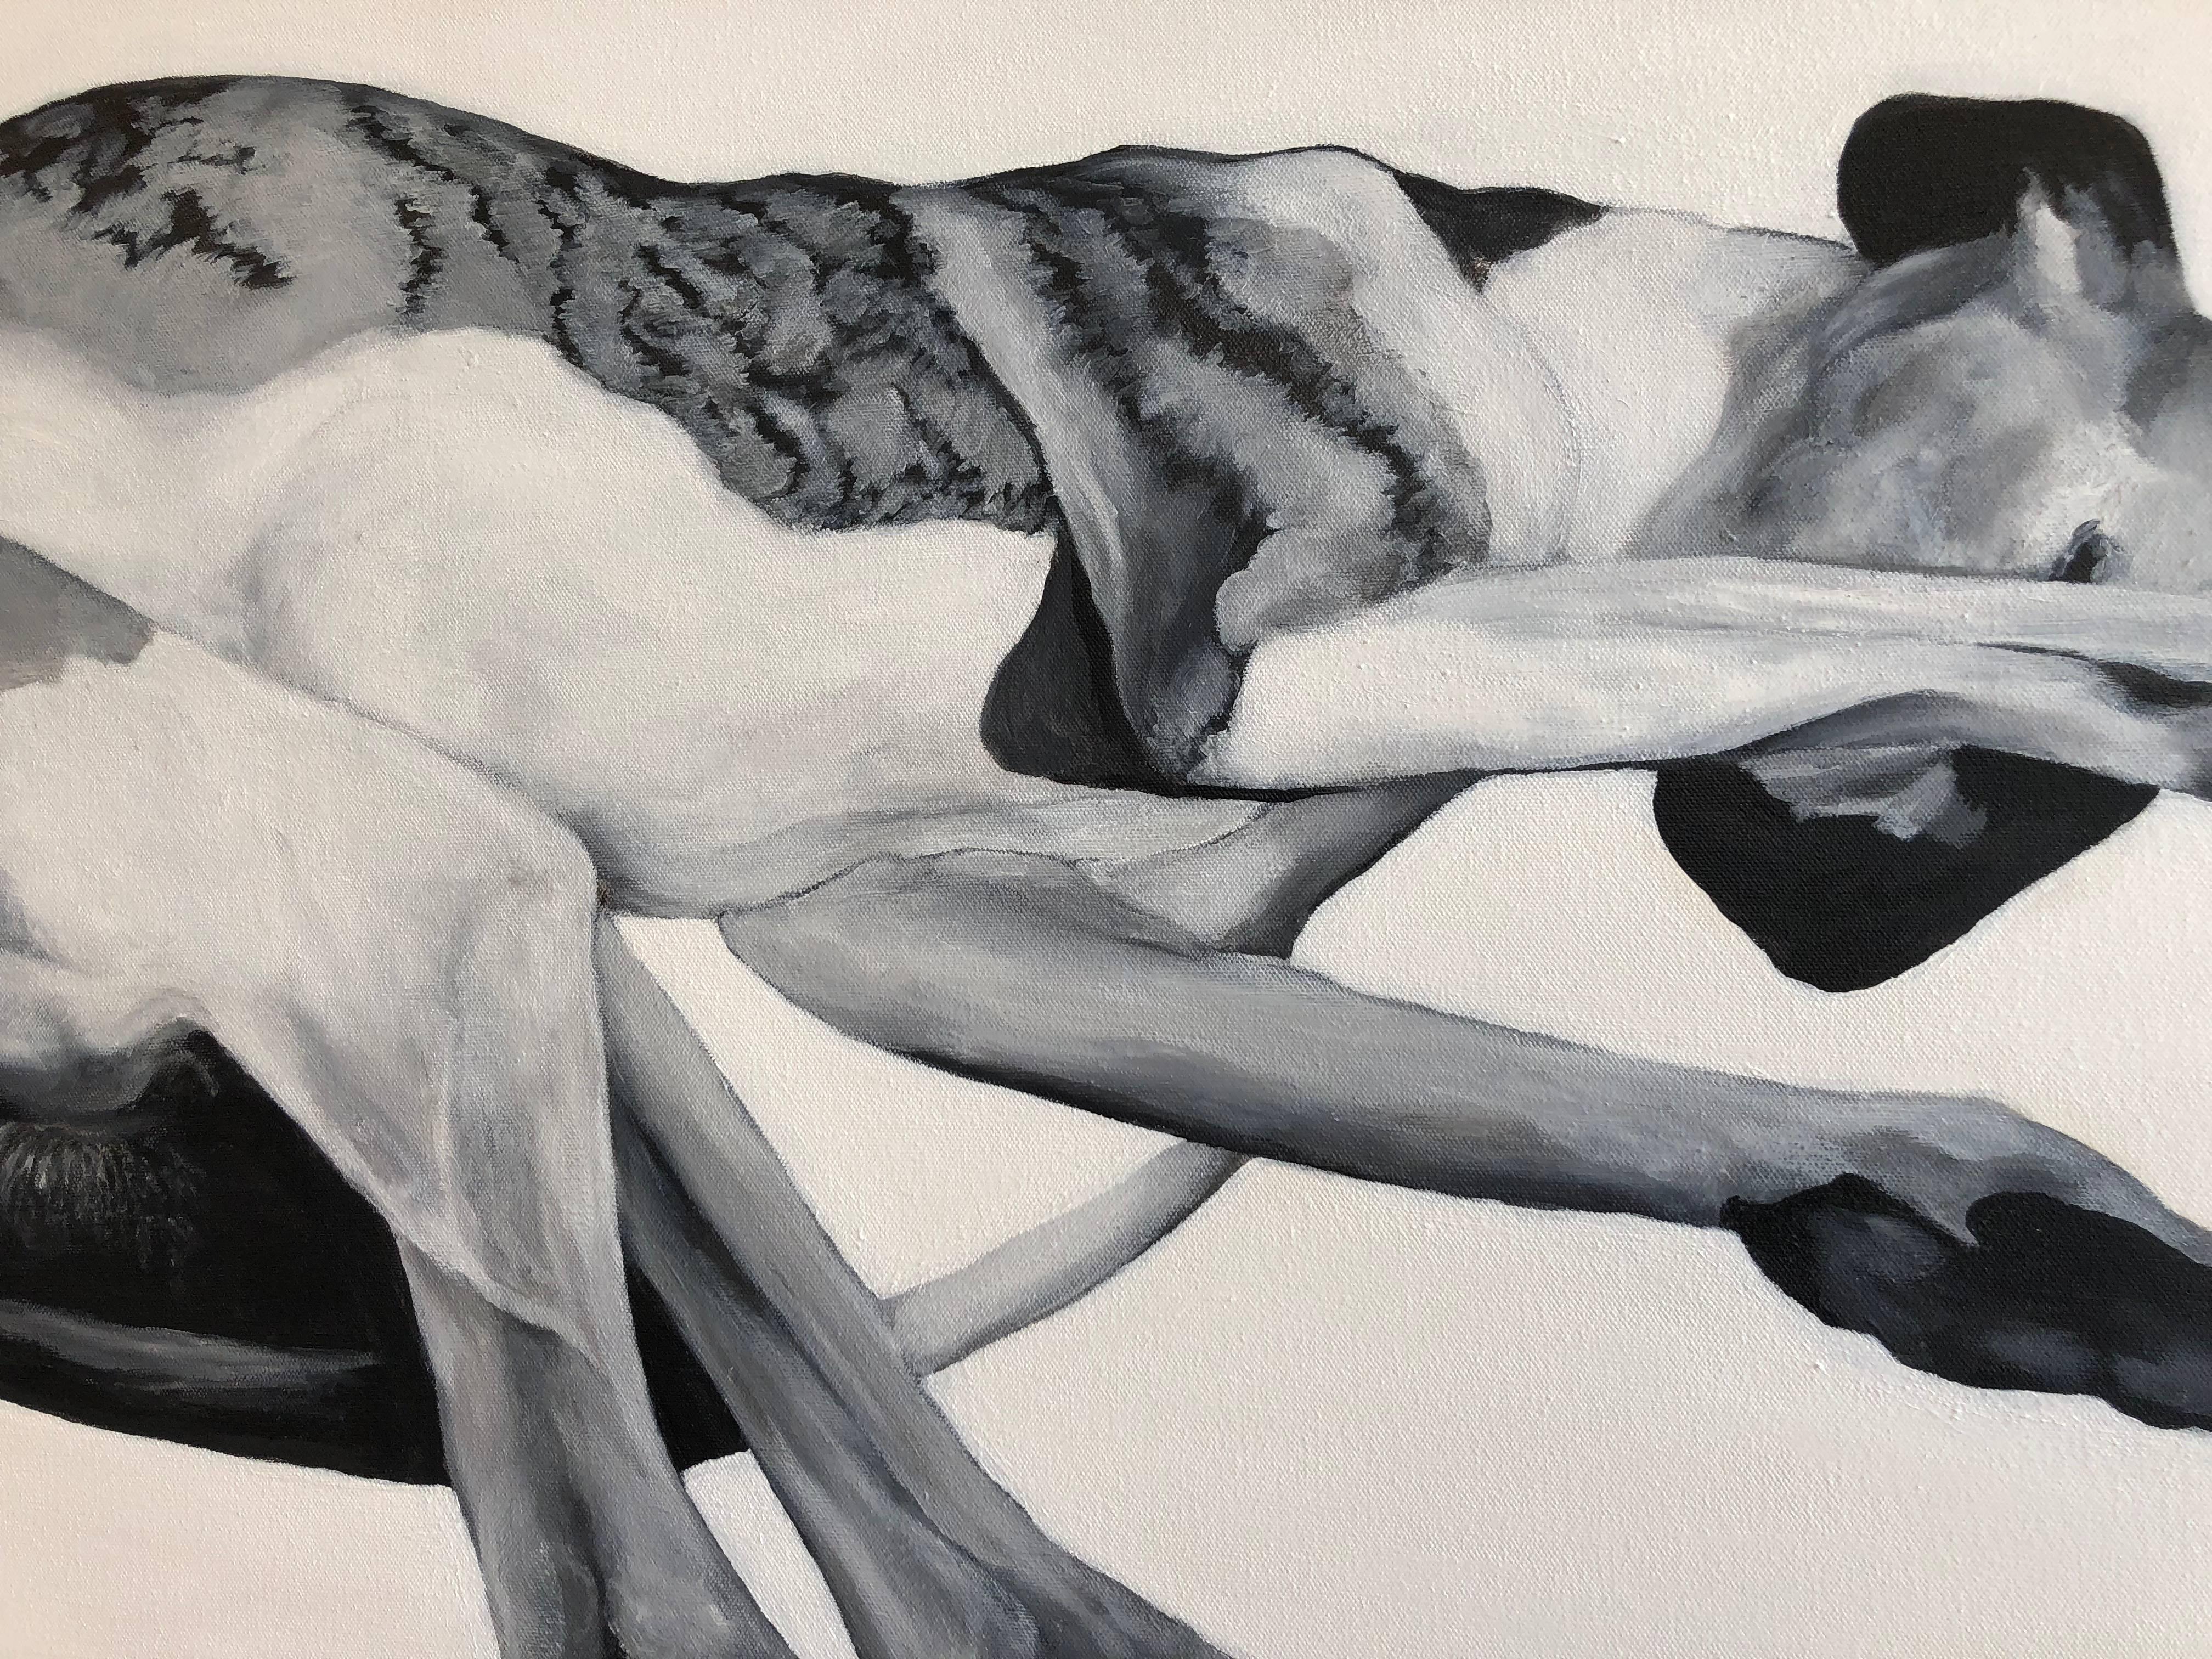 A painting on canvas from a new boy of work by Nataliya Hines titled 'At Rest,' building on the success of her premiere show 'Sighthound' in 2017. The works is an extension of the allegorical conceptualization of socio-sexually dynamics, a topic the